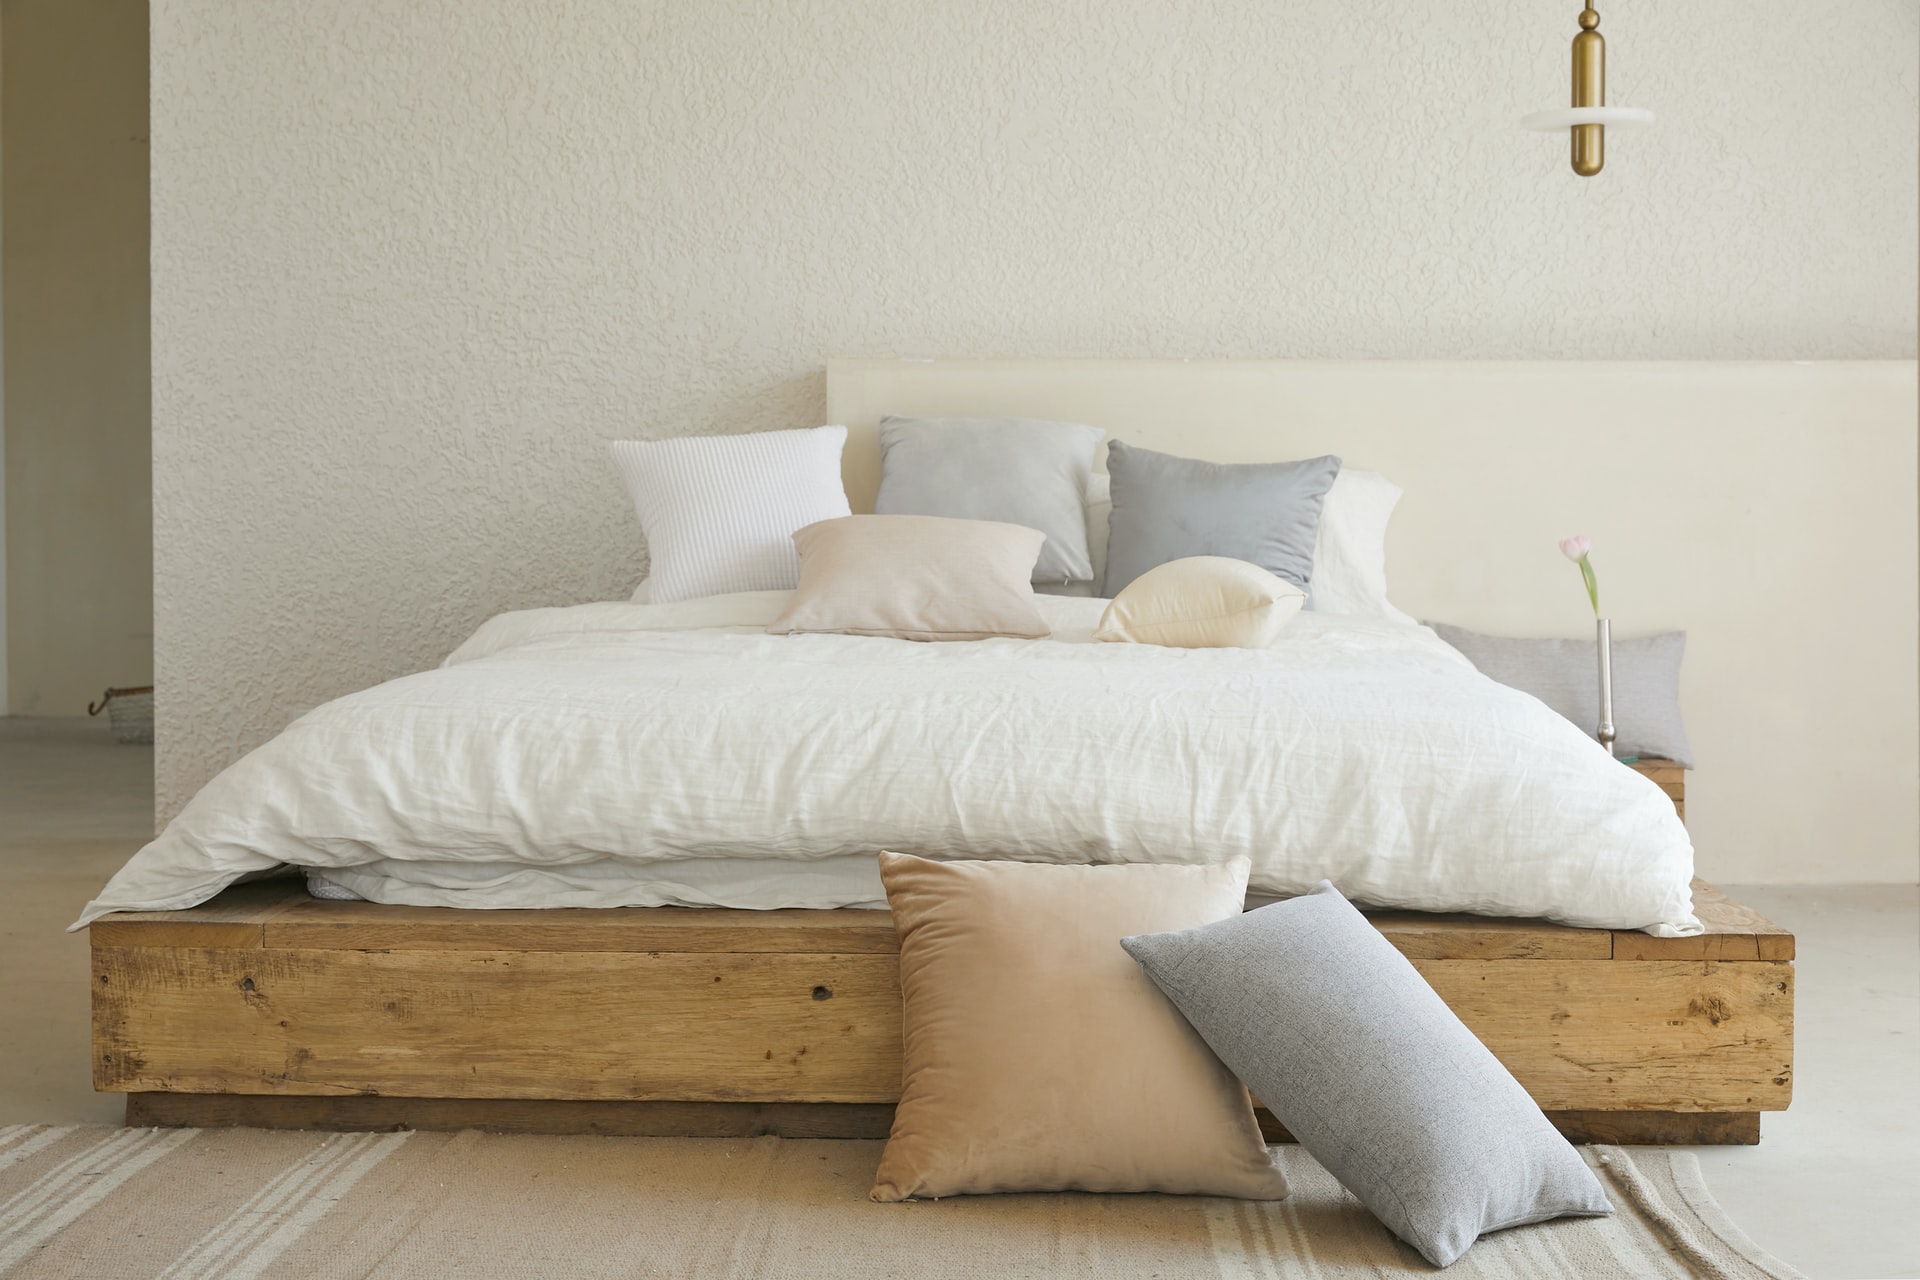 Mattress Shopping: How to Choose the Right Mattress For You